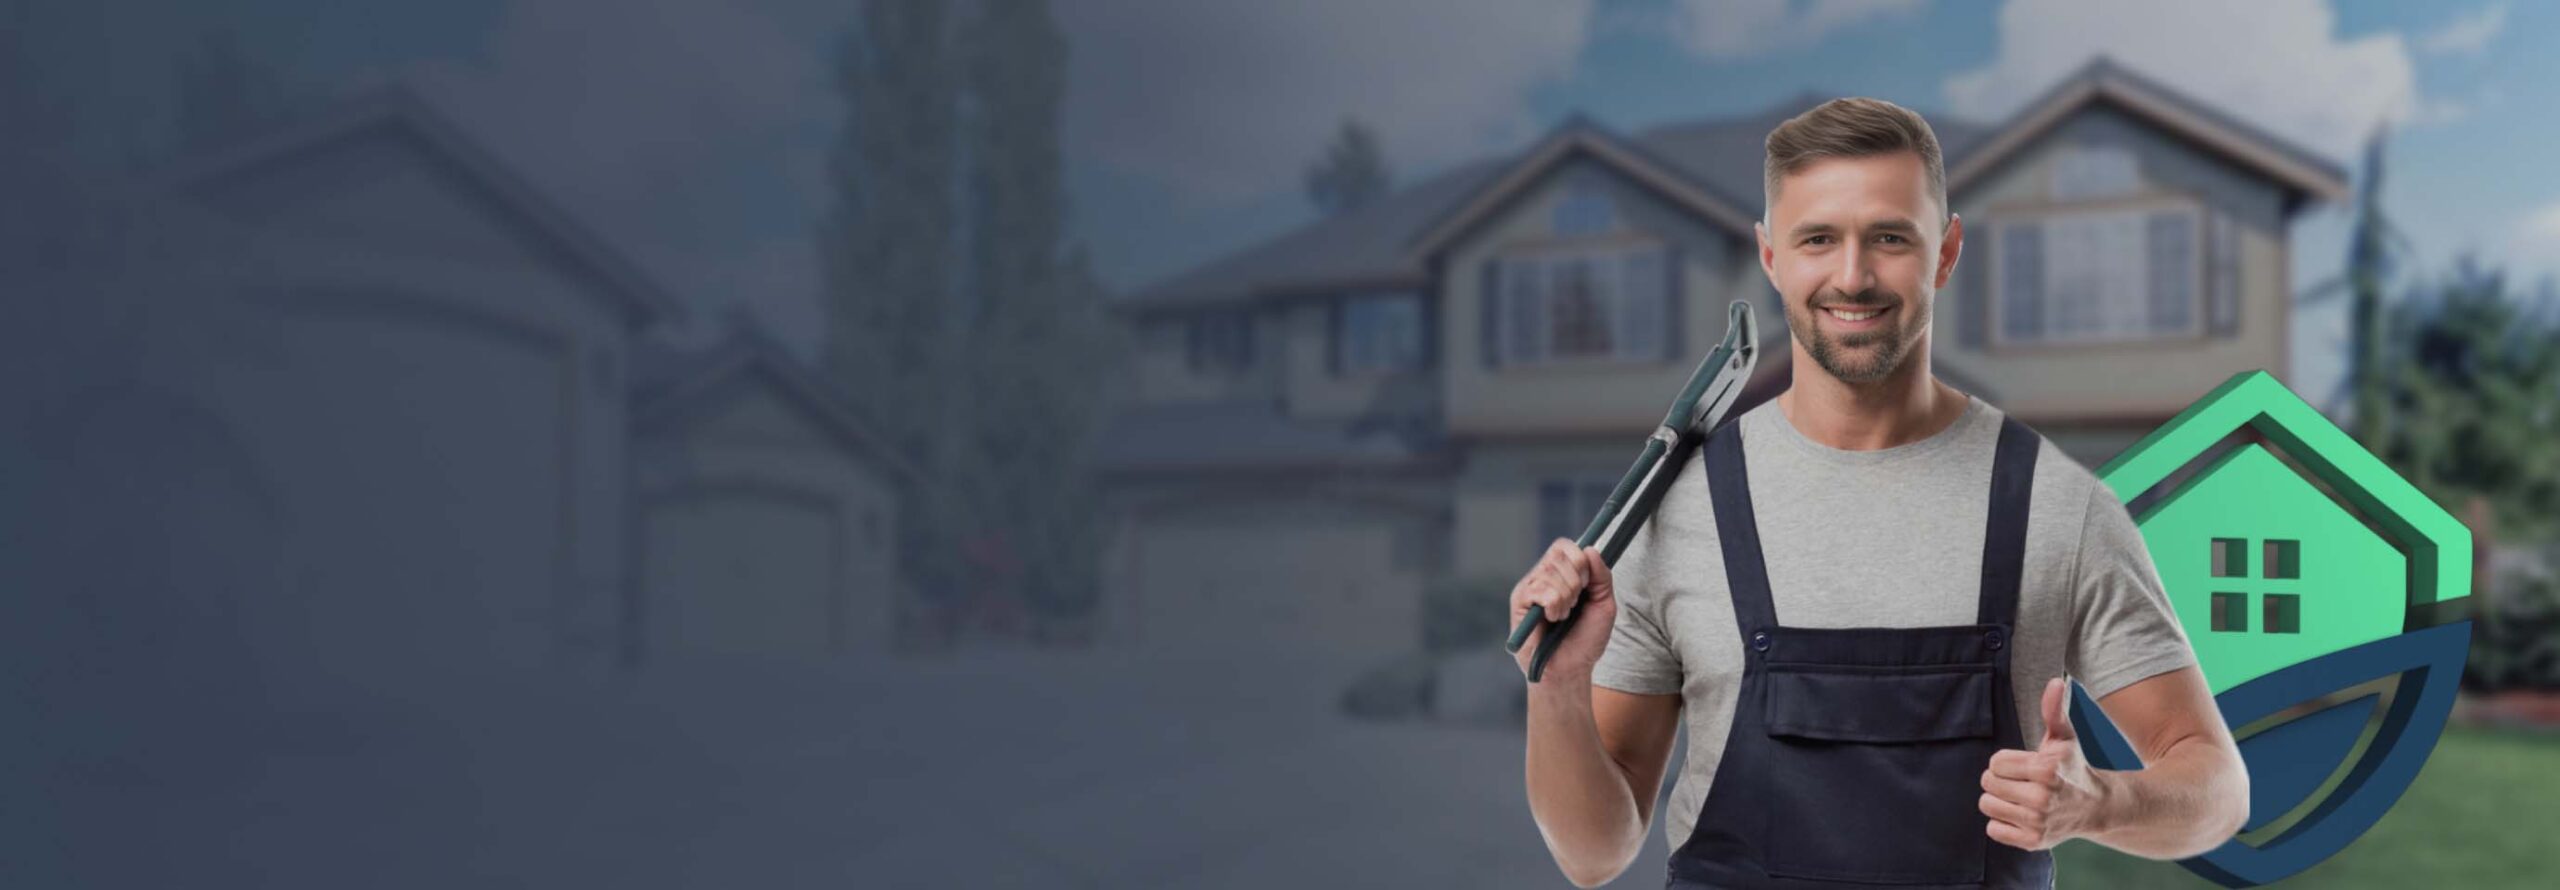 residential home warranty services montreal